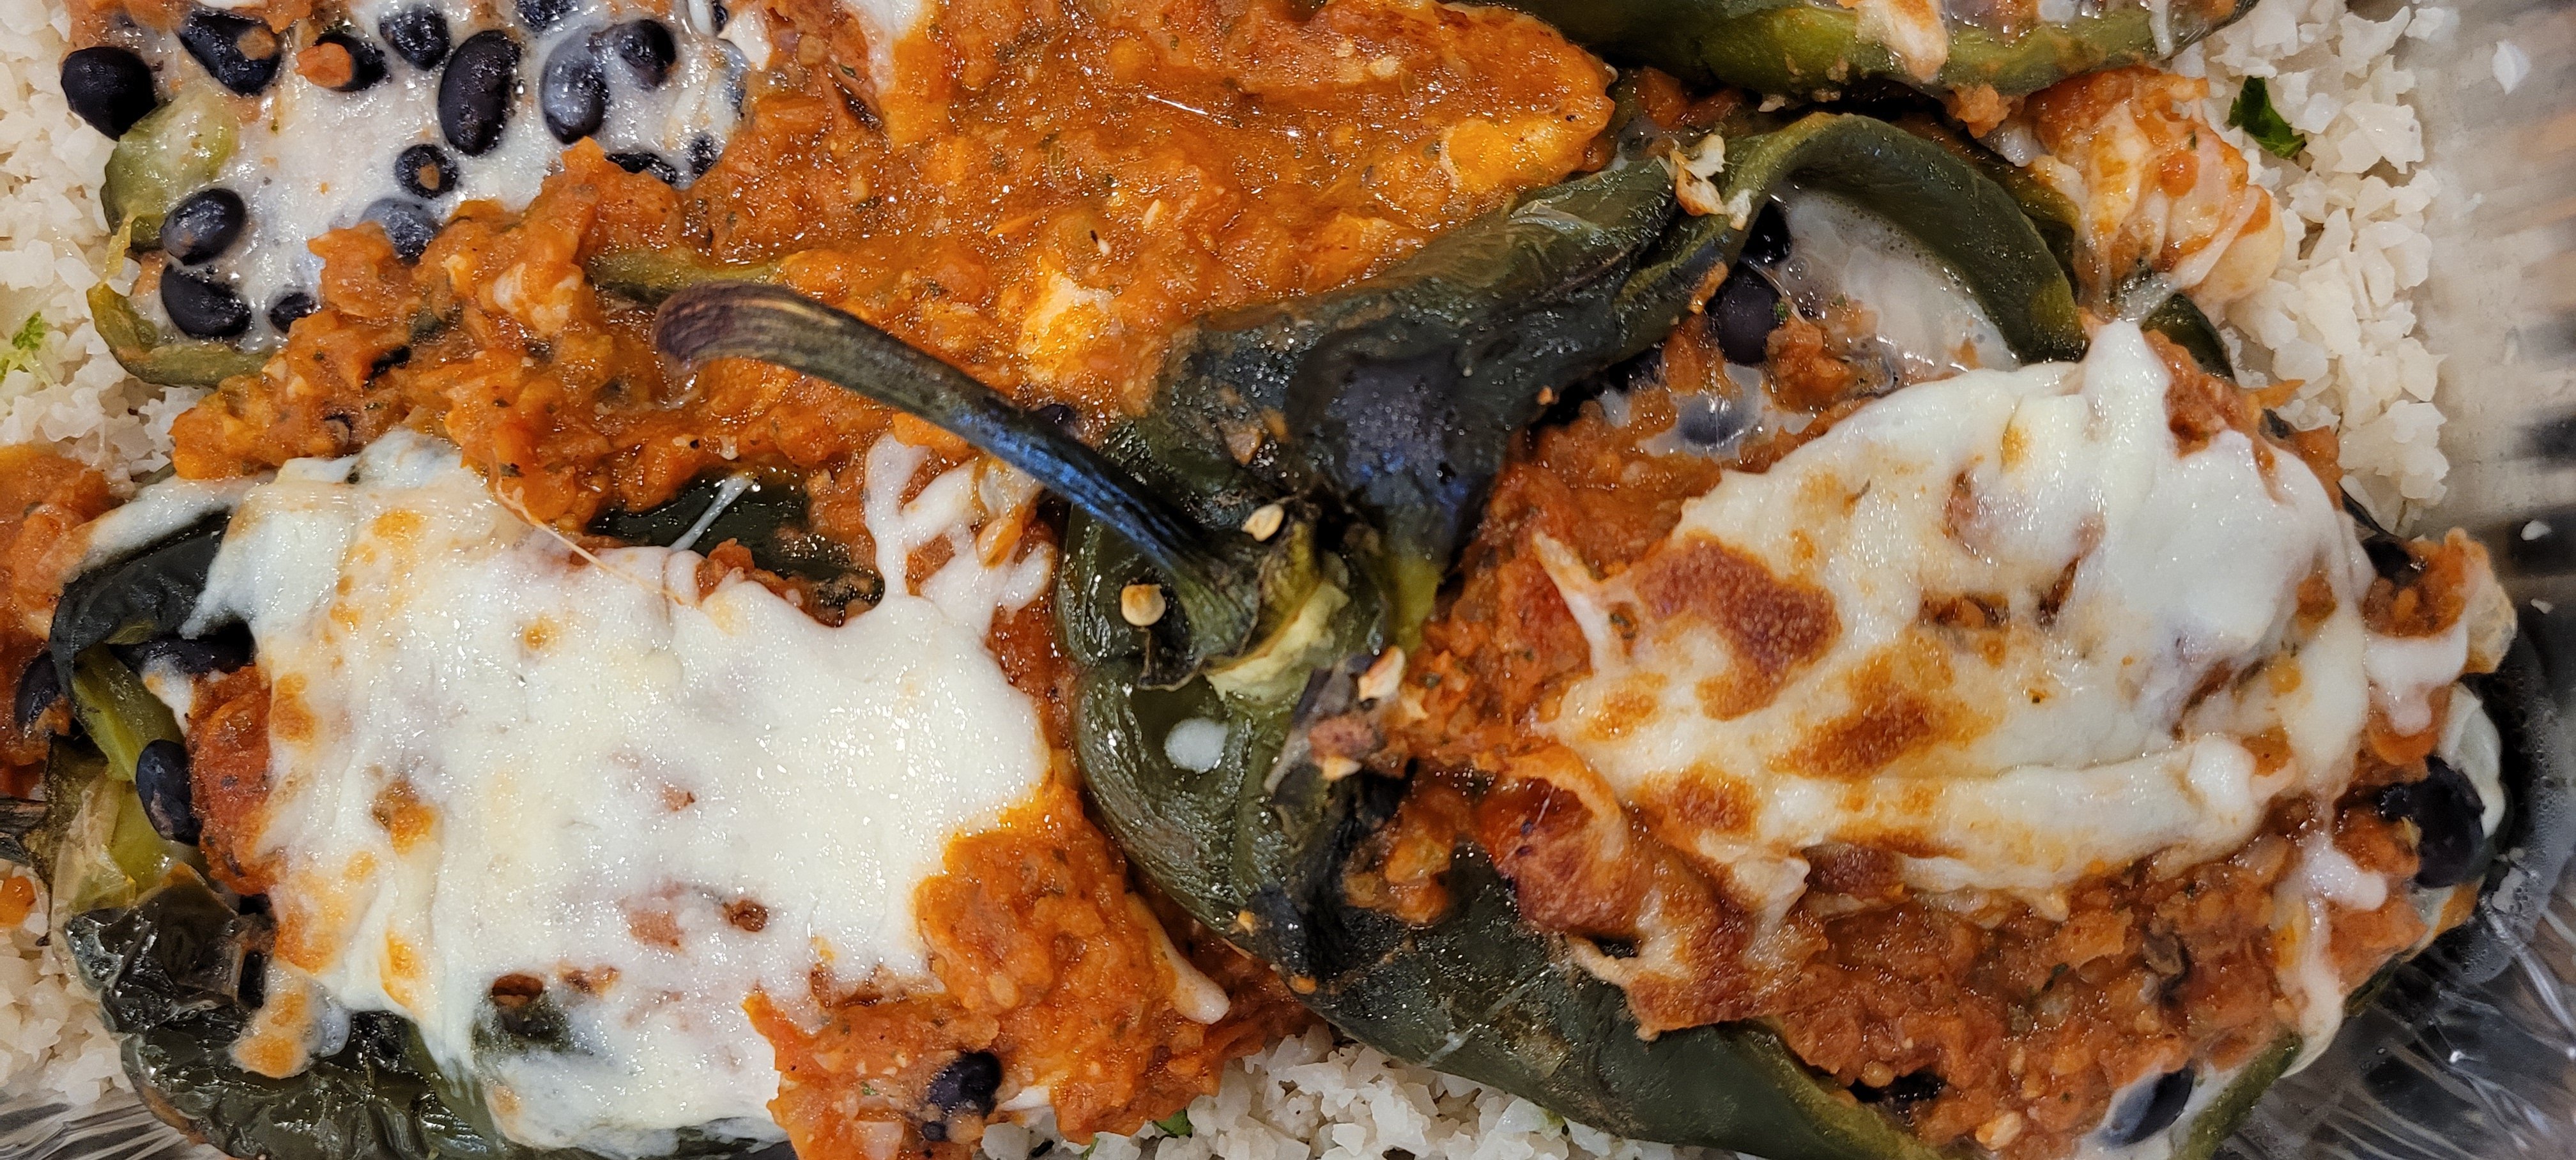 Roasted Chile Relleno Rice Bowl